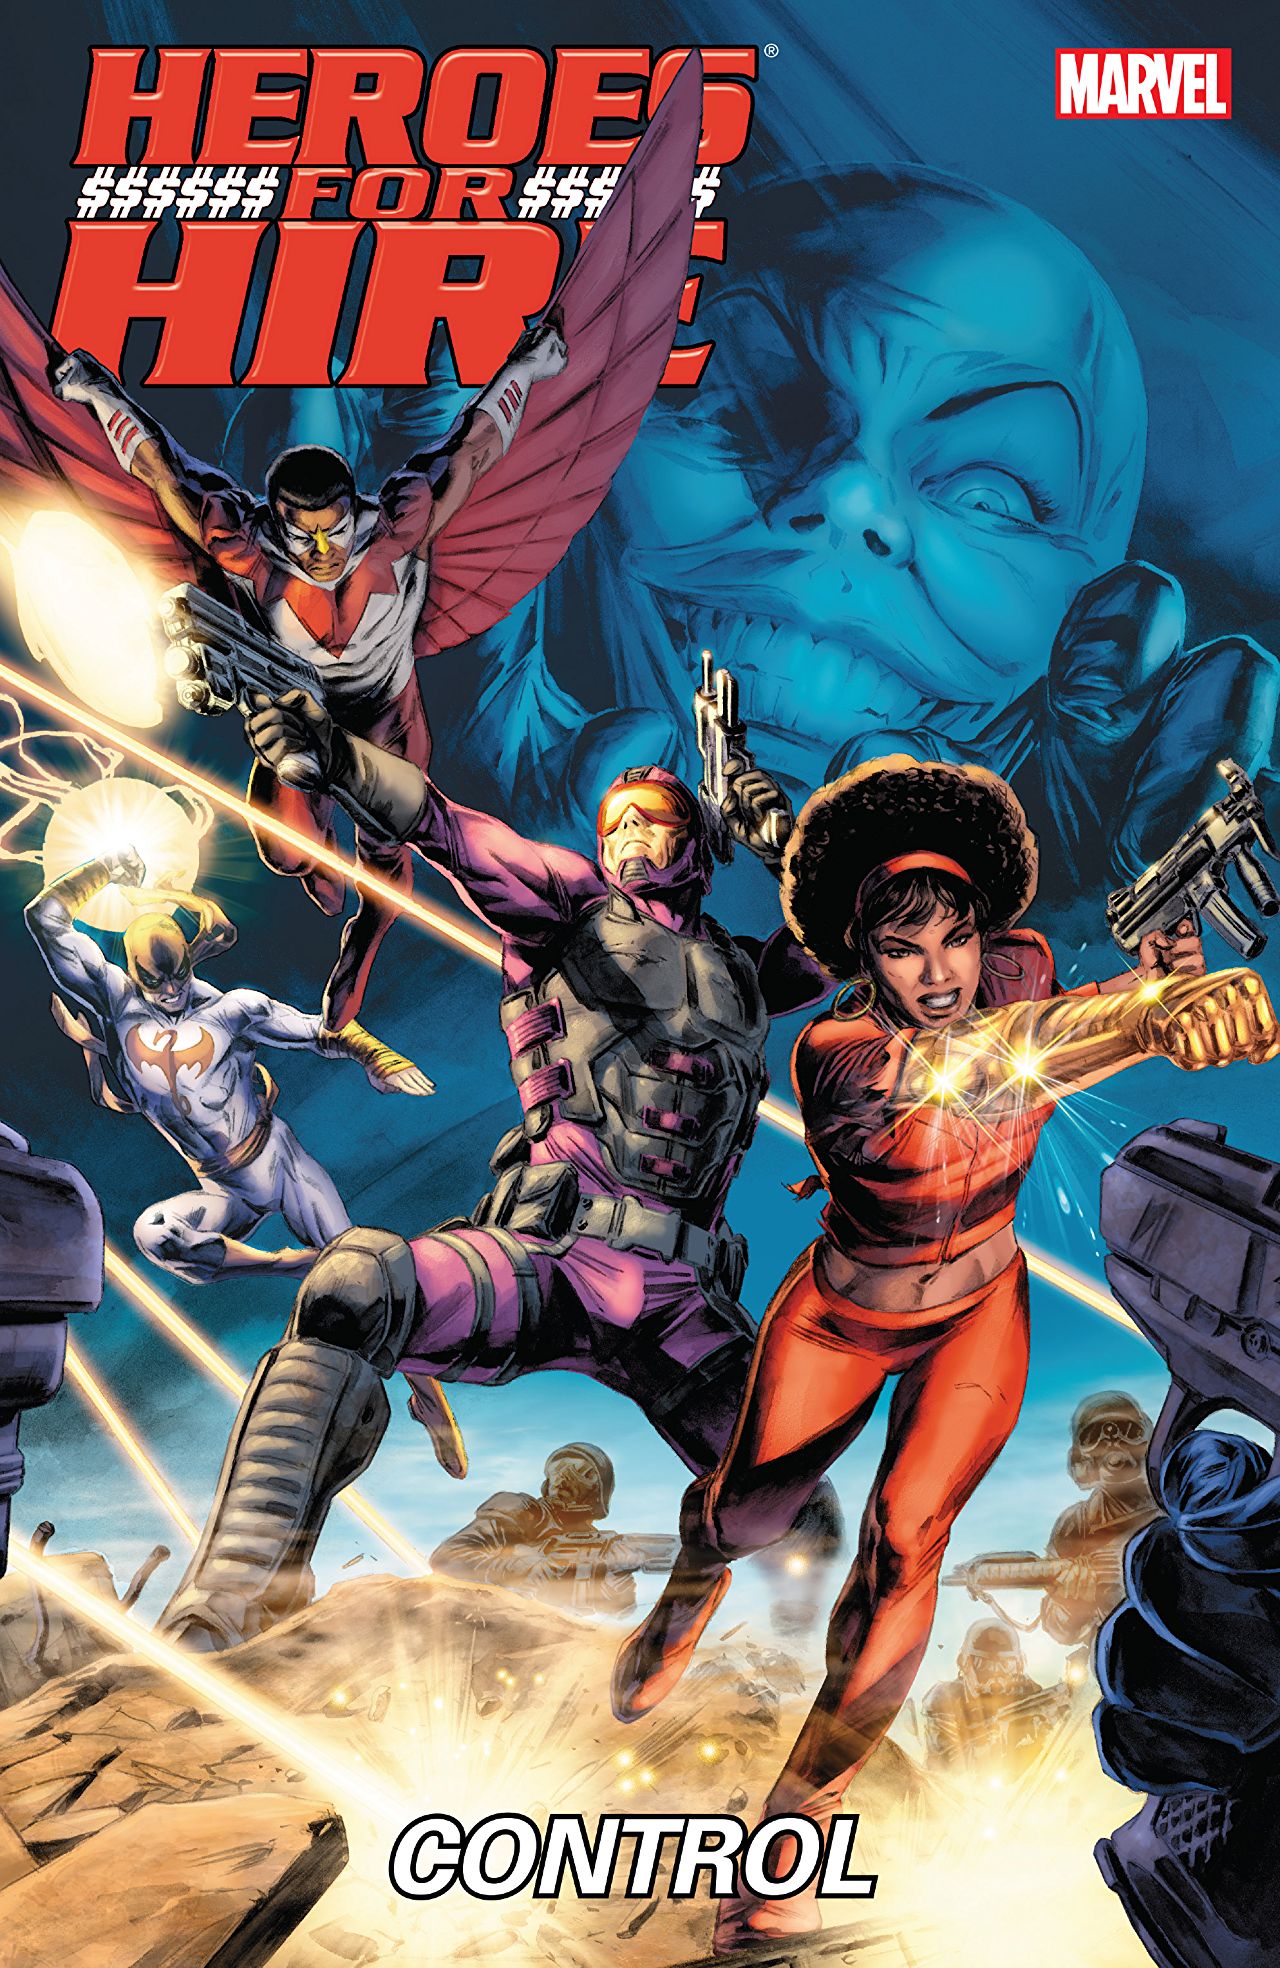 Heroes for Hire by Abnett & Lanning: The Complete Collection' review: Misty Knight steals the spotlight in a collection well worth the price tag